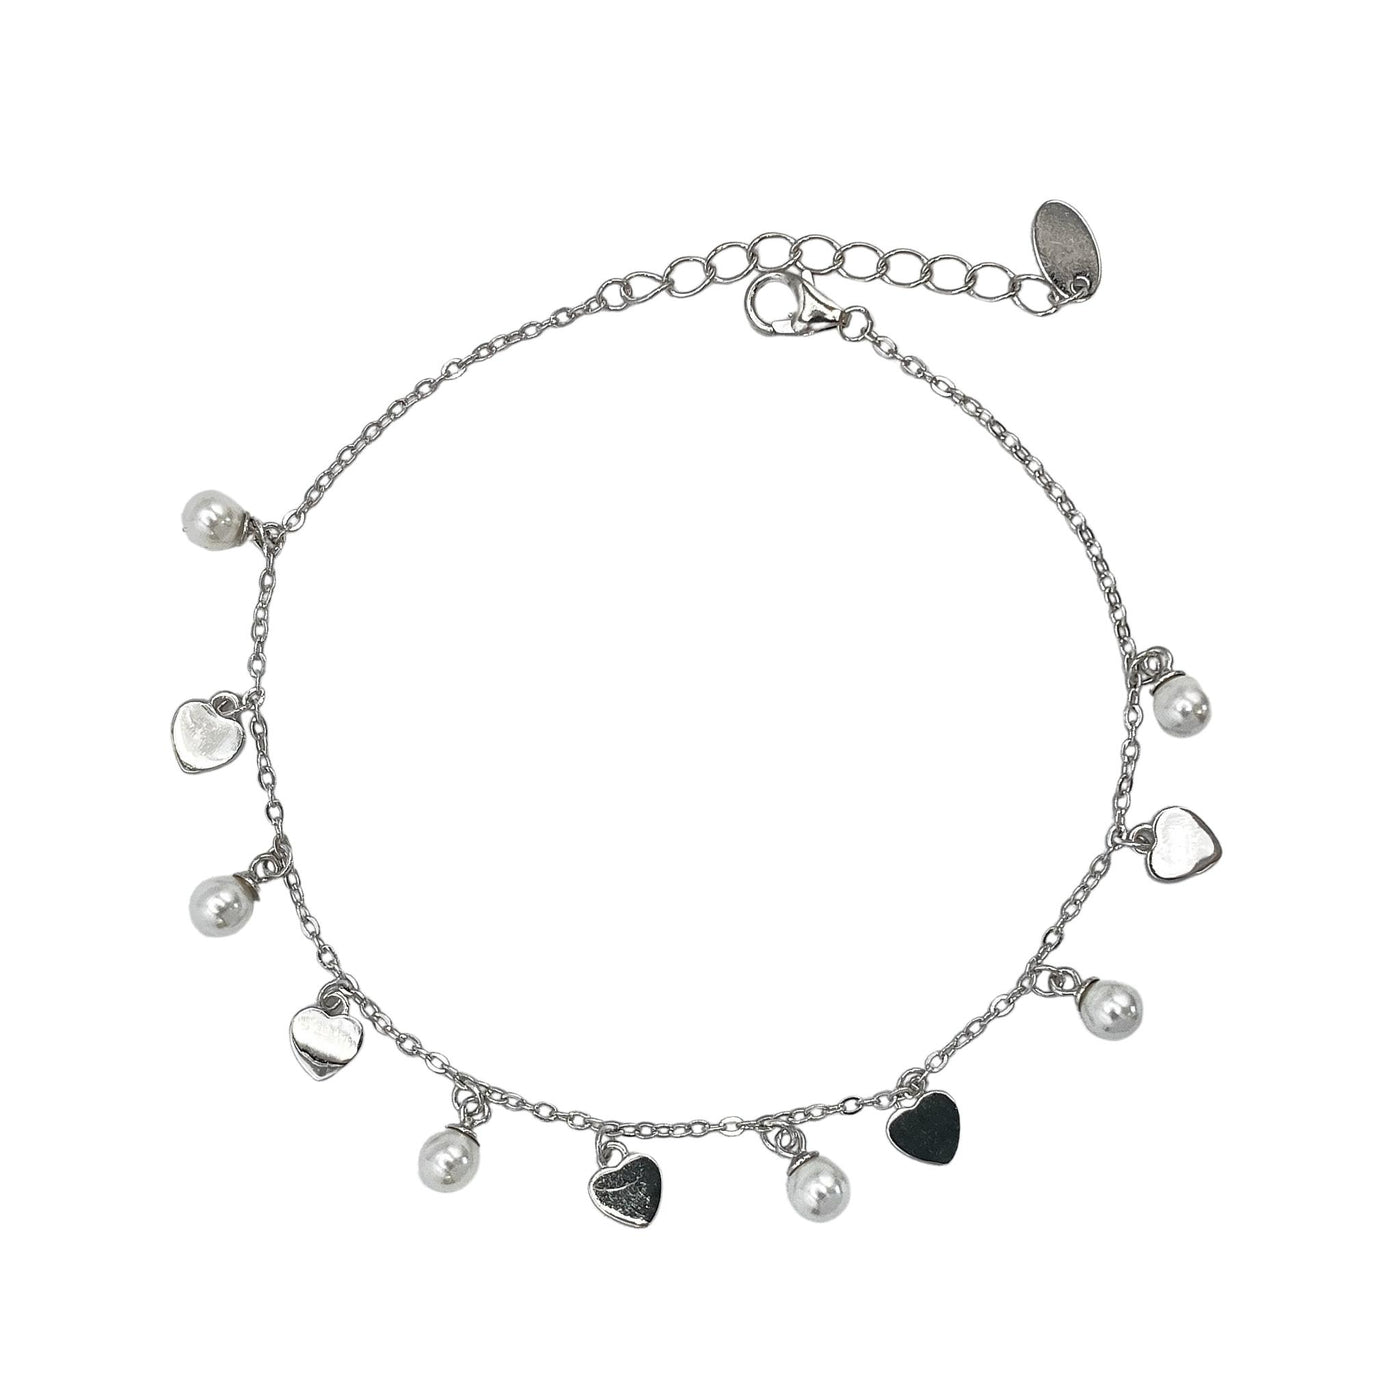 Silver bracelet with hearts and pearl charms